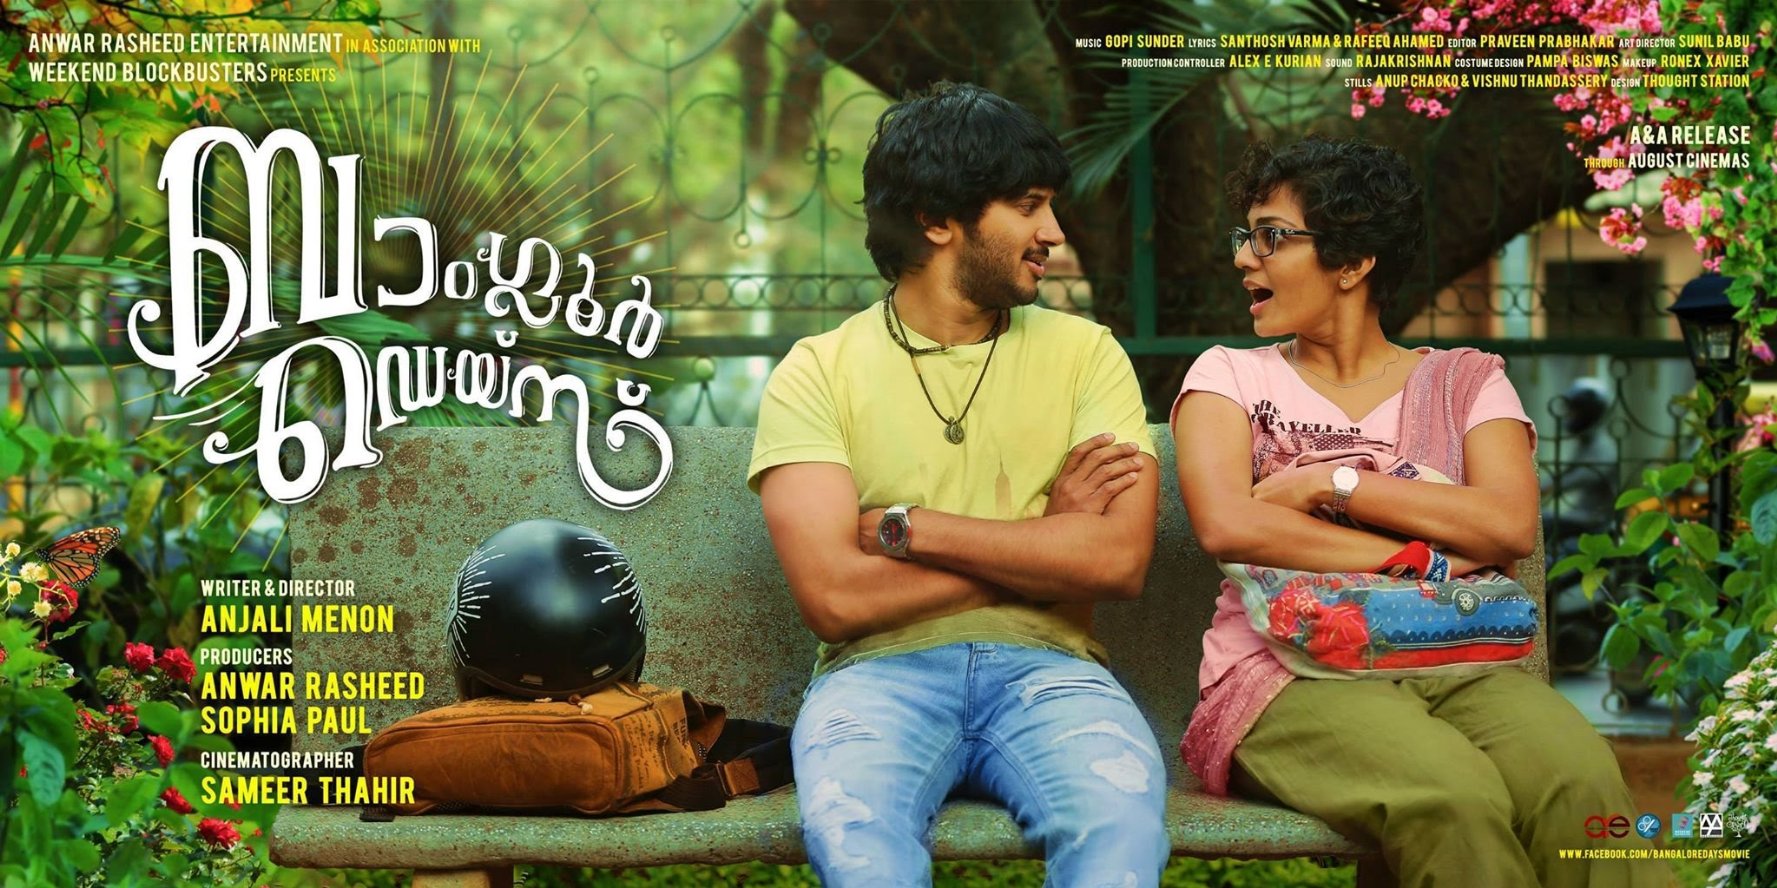 Bangalore Days 2014 Full Movie Watch in HD Online for Free 